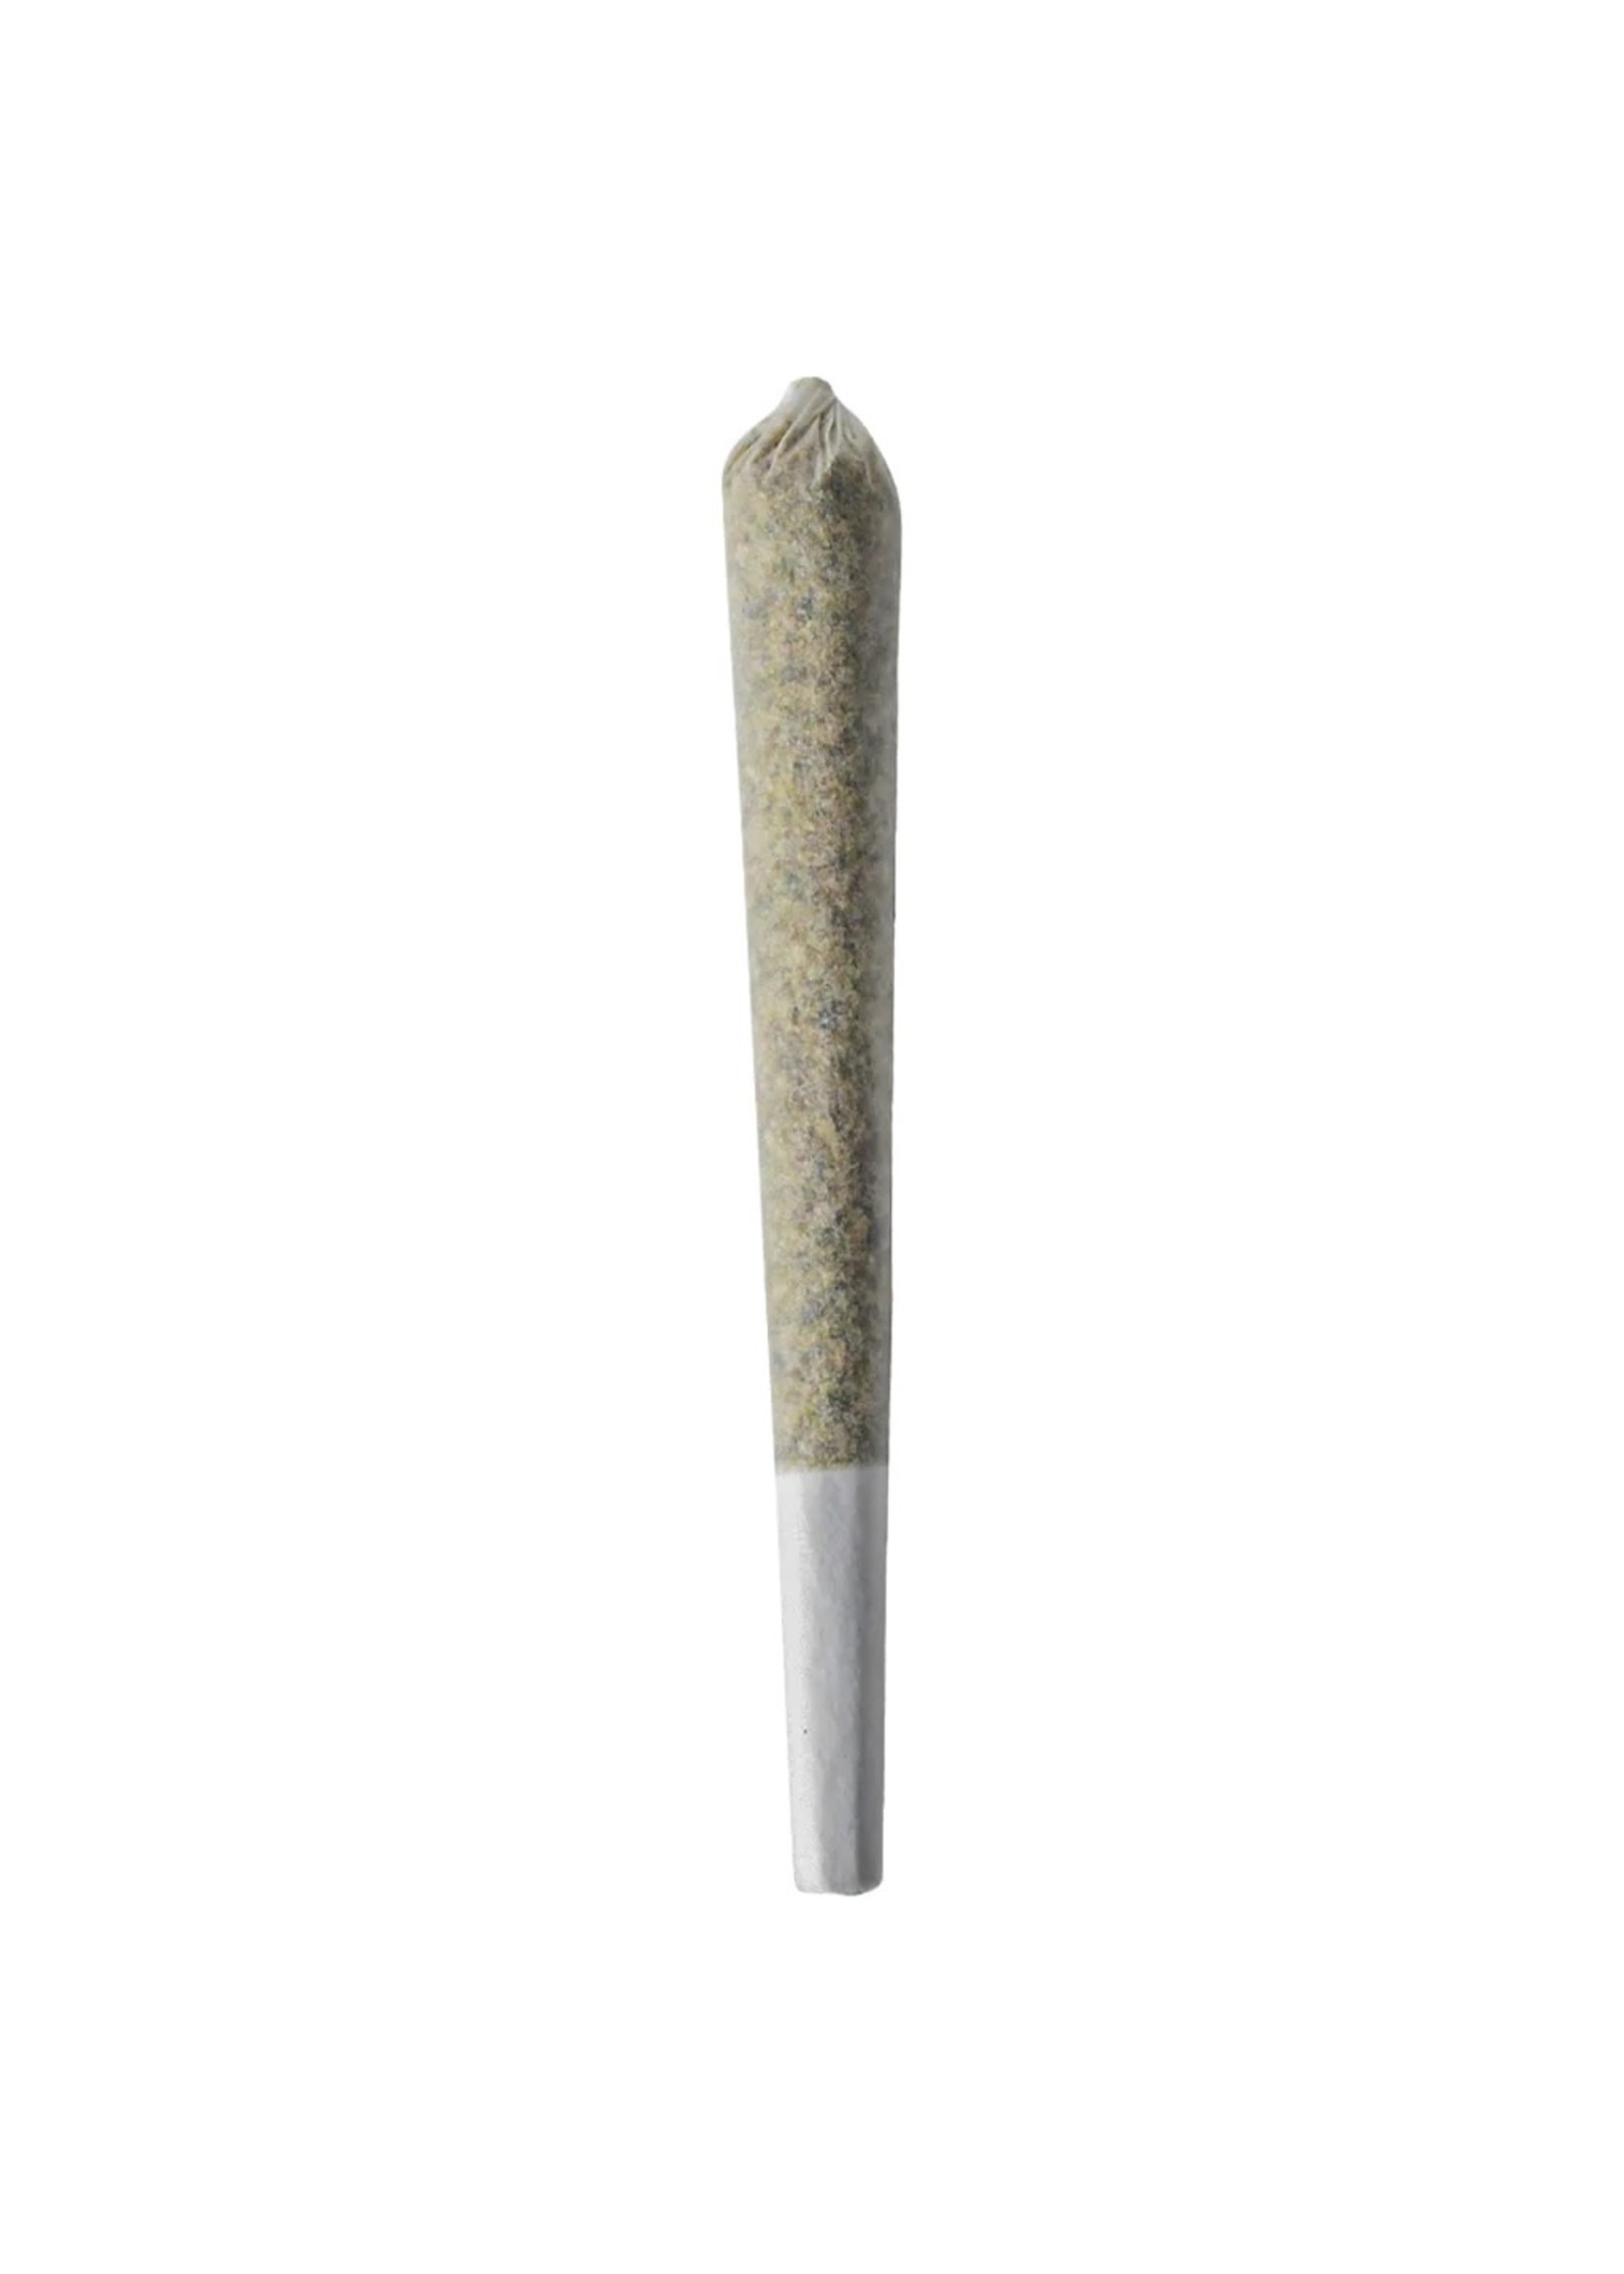 BZAM Fresh Squeezed OG Jet Pack infused Pre-Roll 1x1G